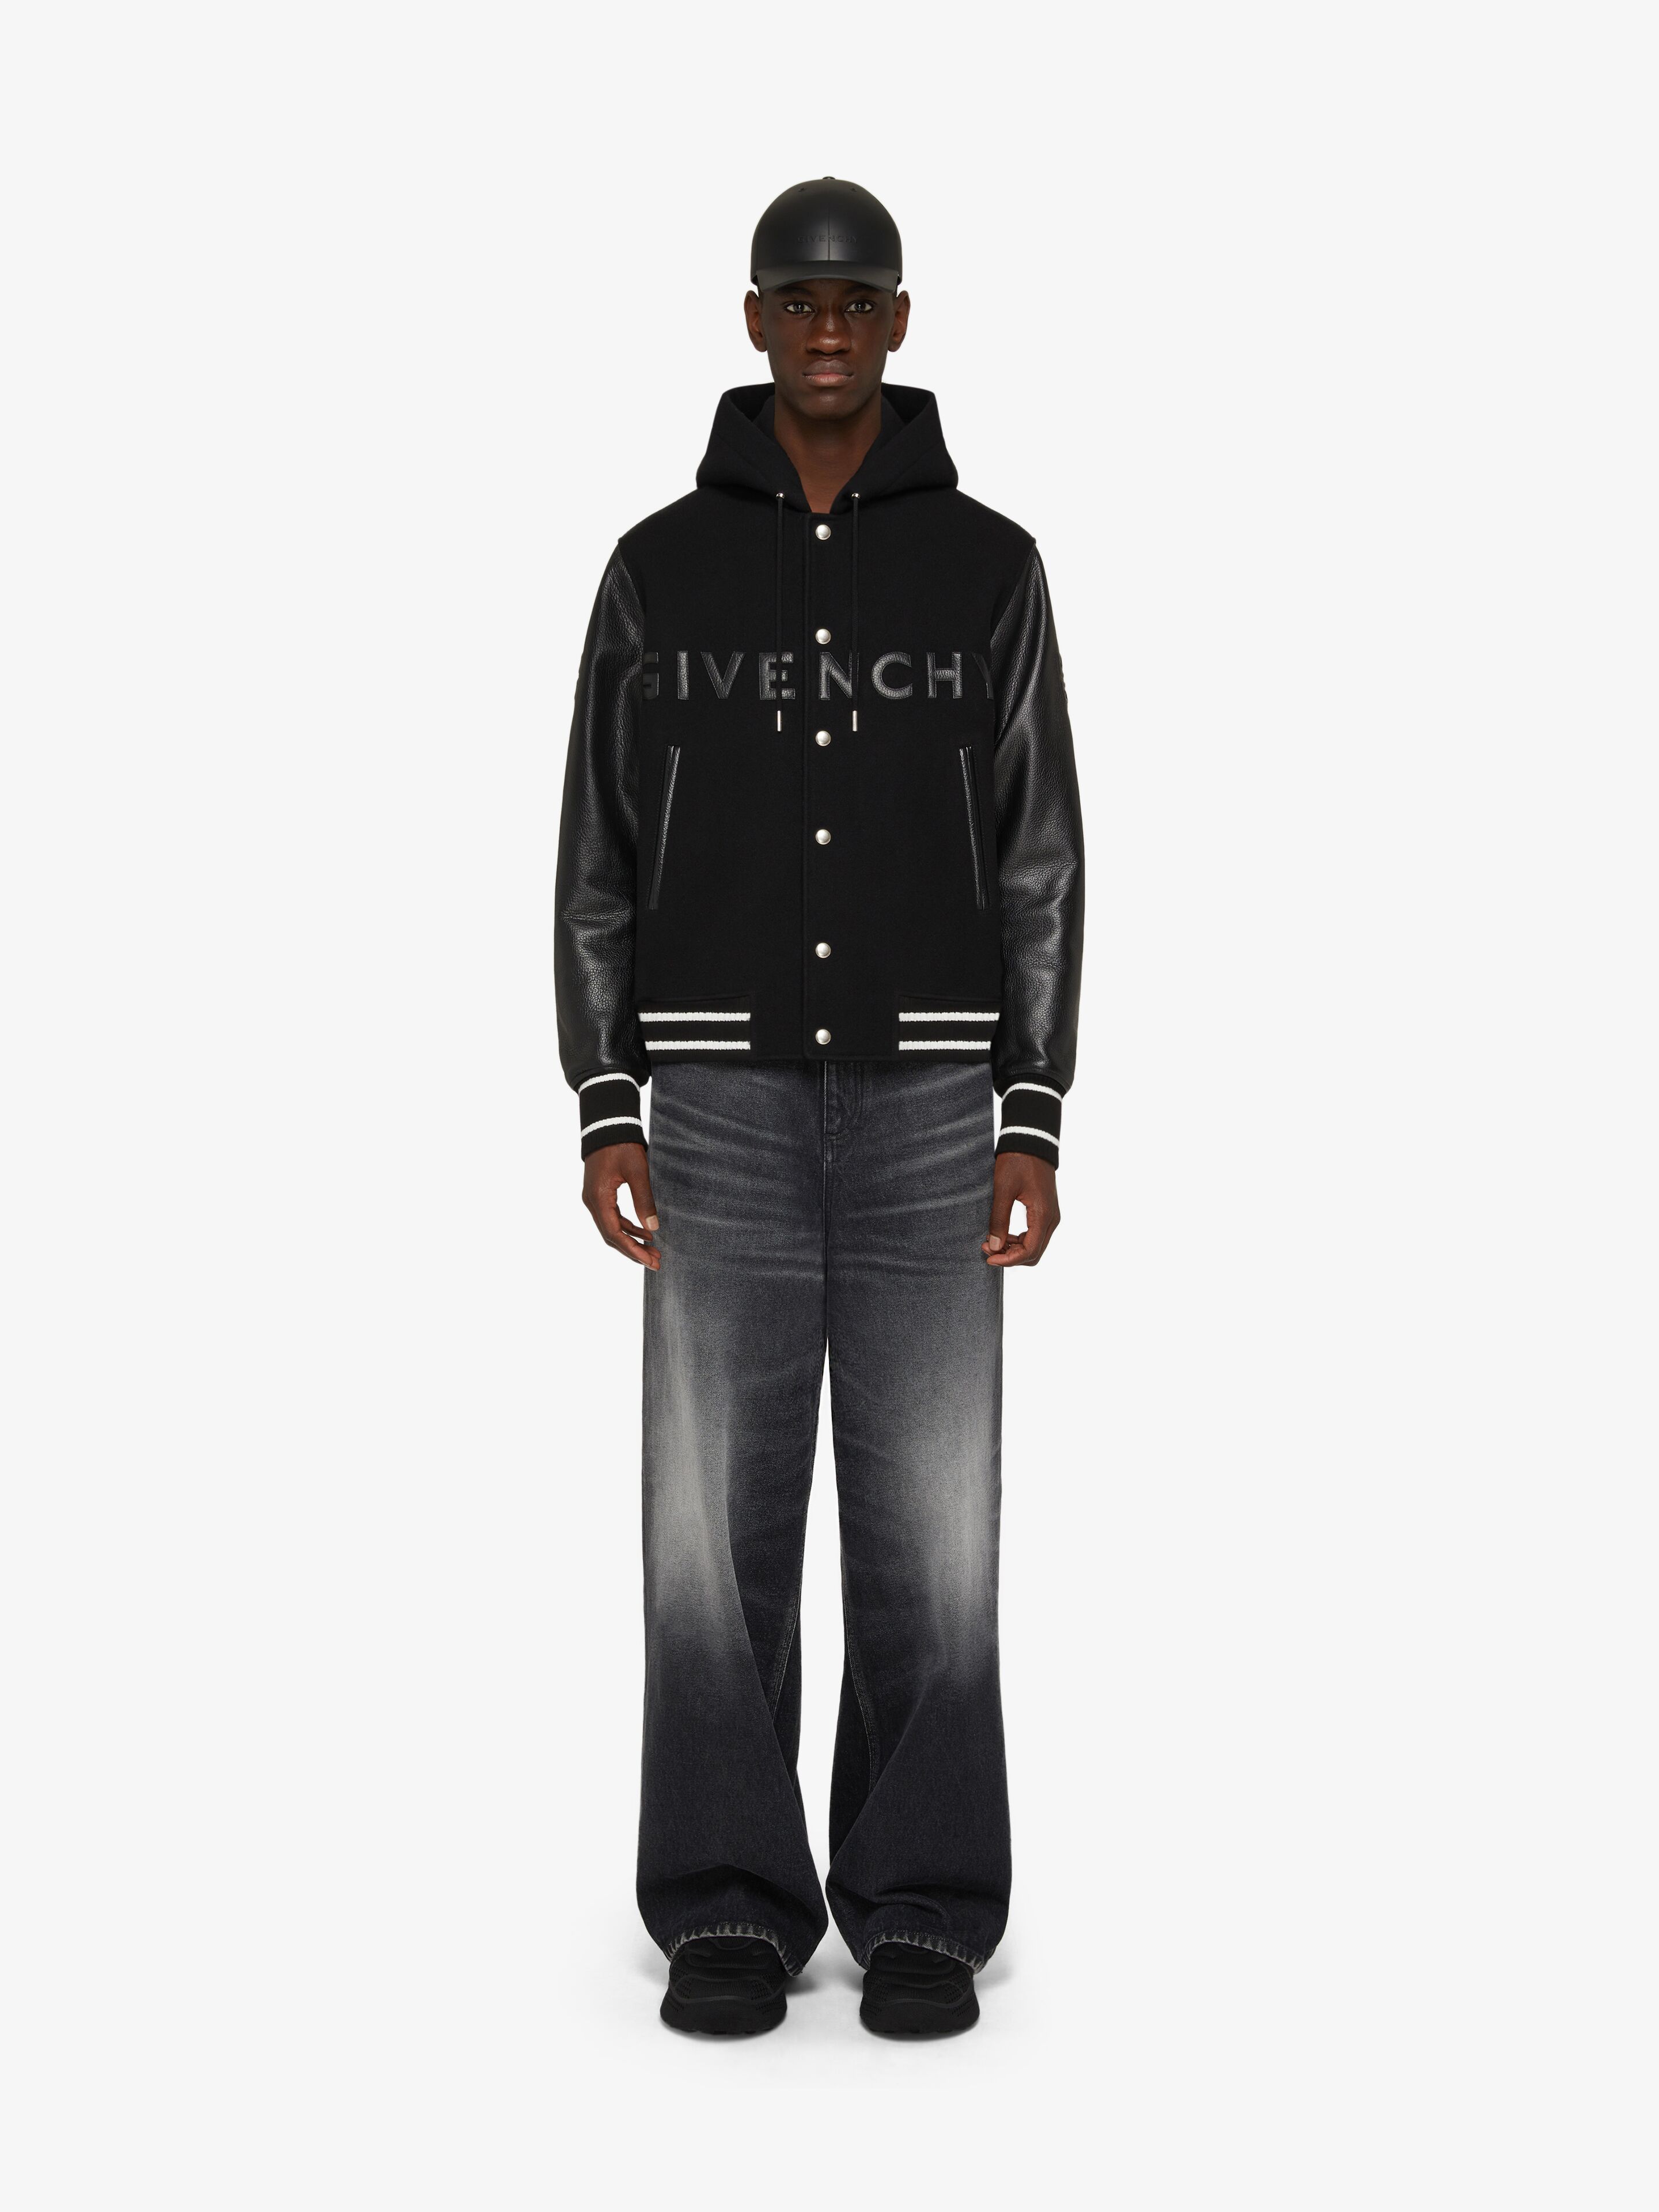 GIVENCHY hooded varsity jacket in wool and leather